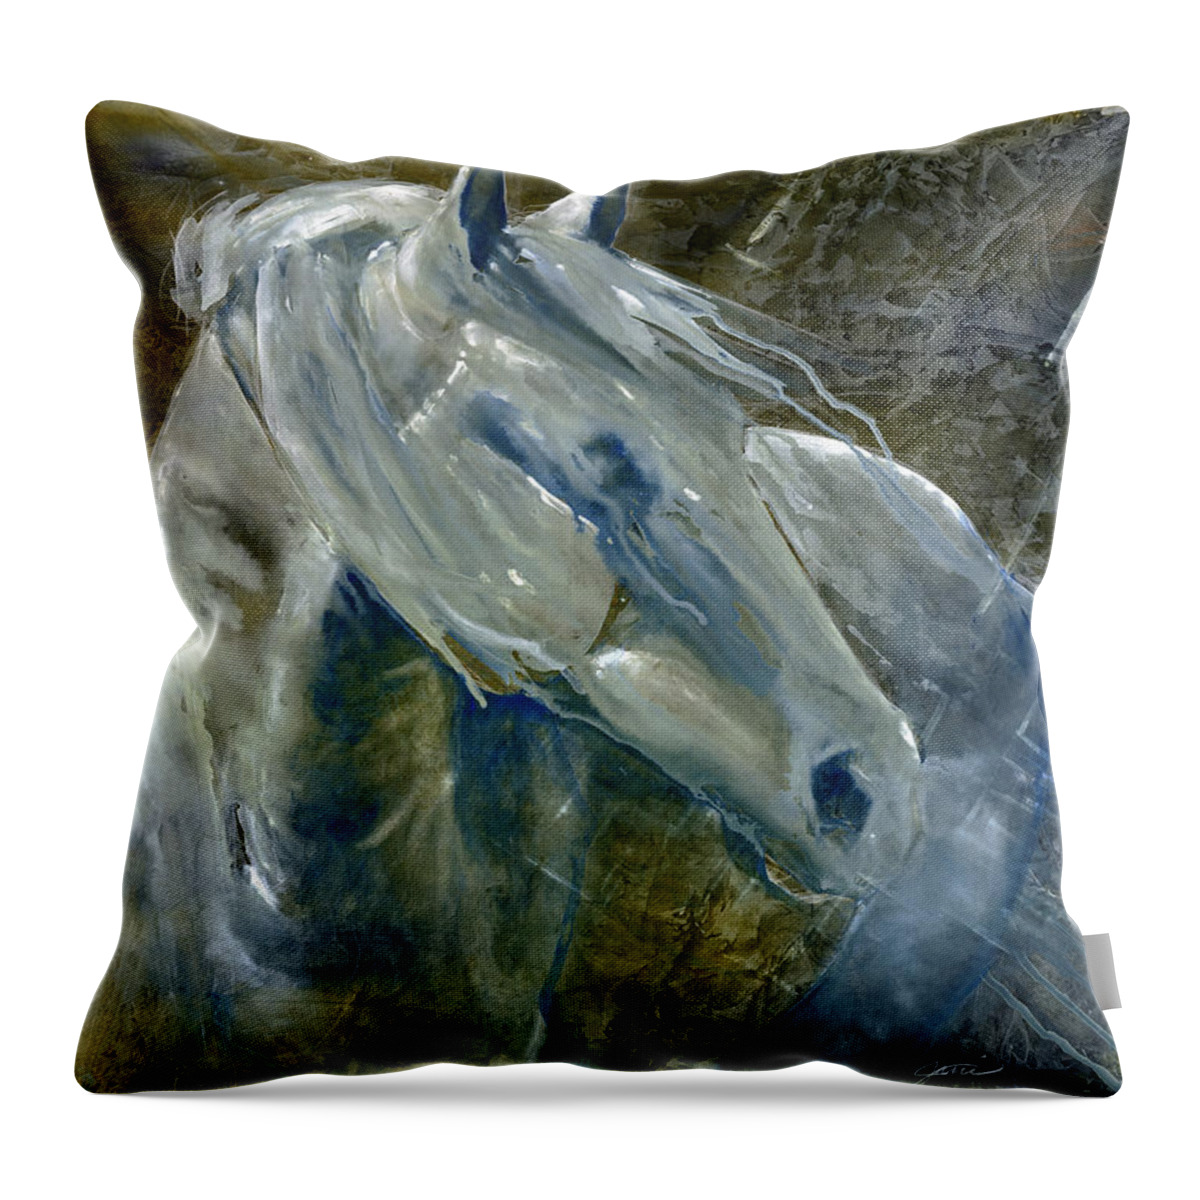 Horse Art Throw Pillow featuring the painting A Cool Morning Breeze by Jani Freimann